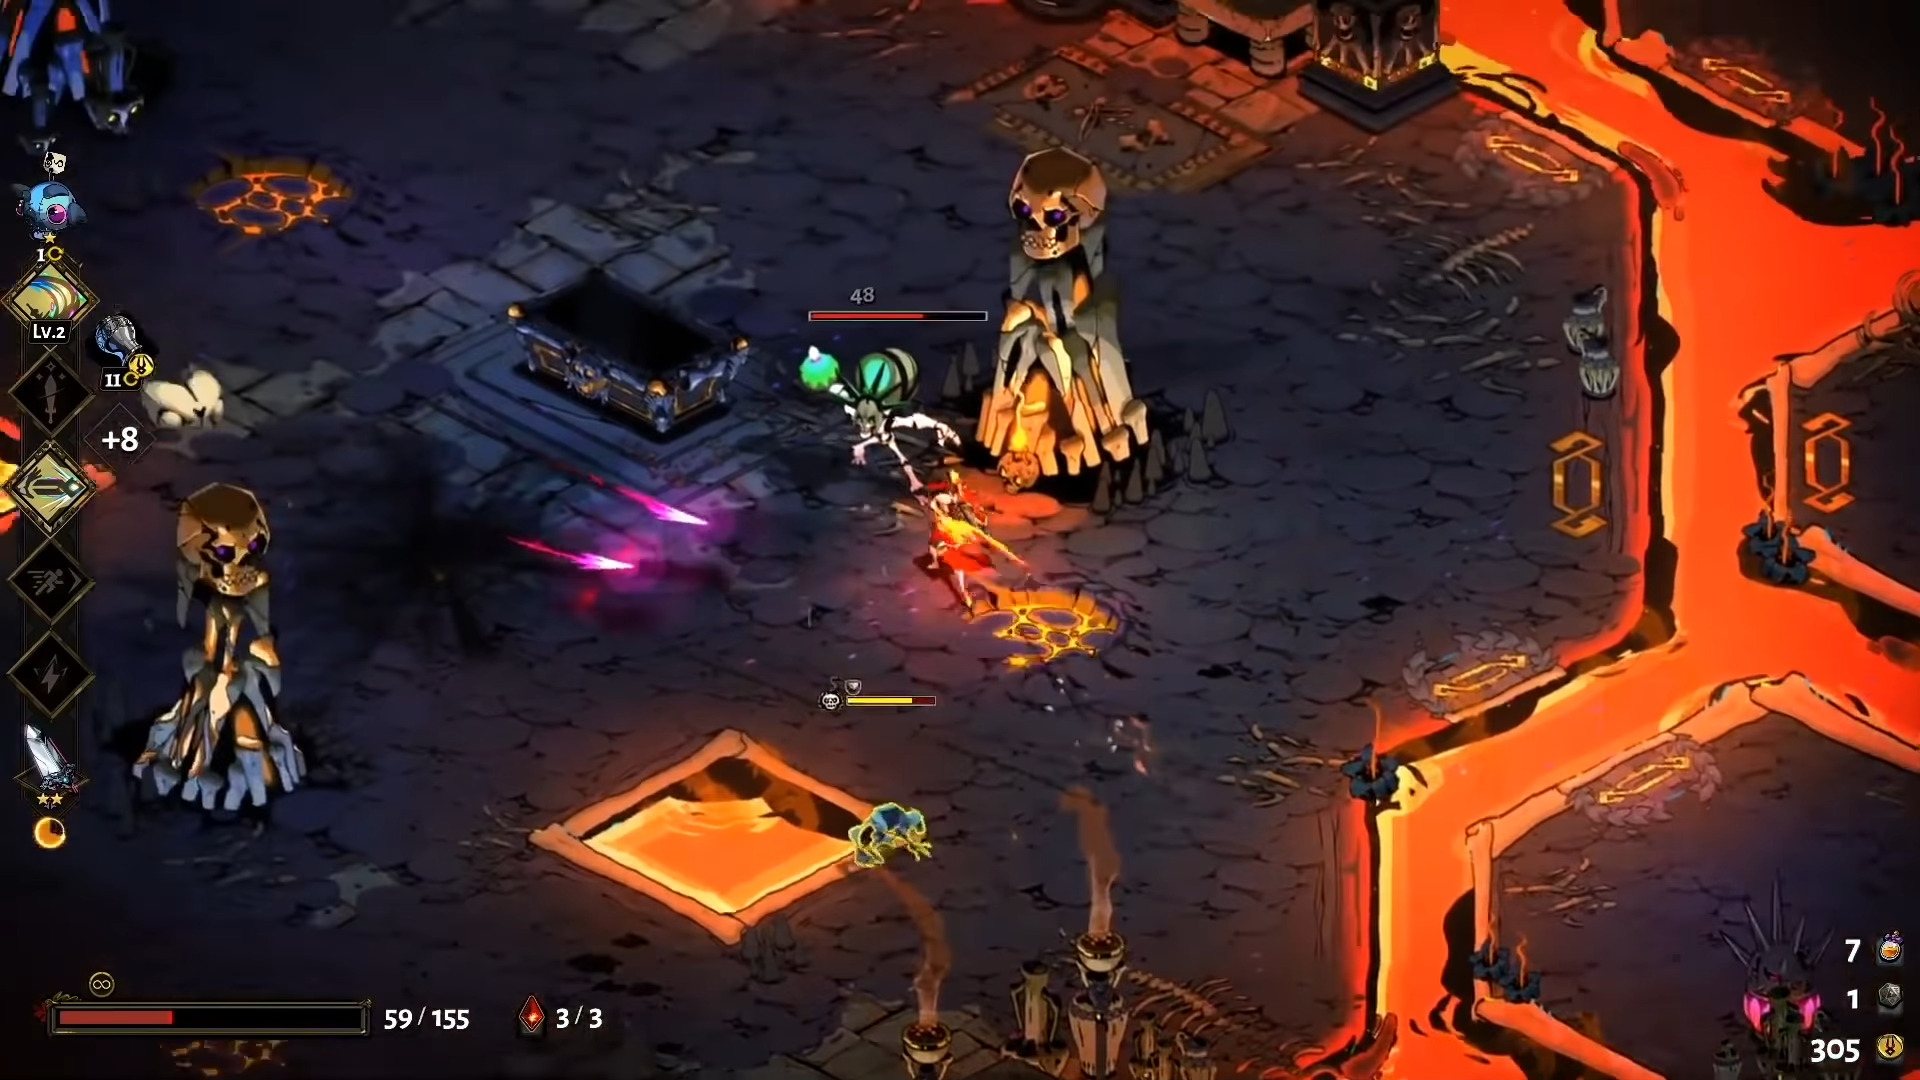 Roguelike Hades From Supergiant Games Has Exited From Early Access After A Brilliant Showing